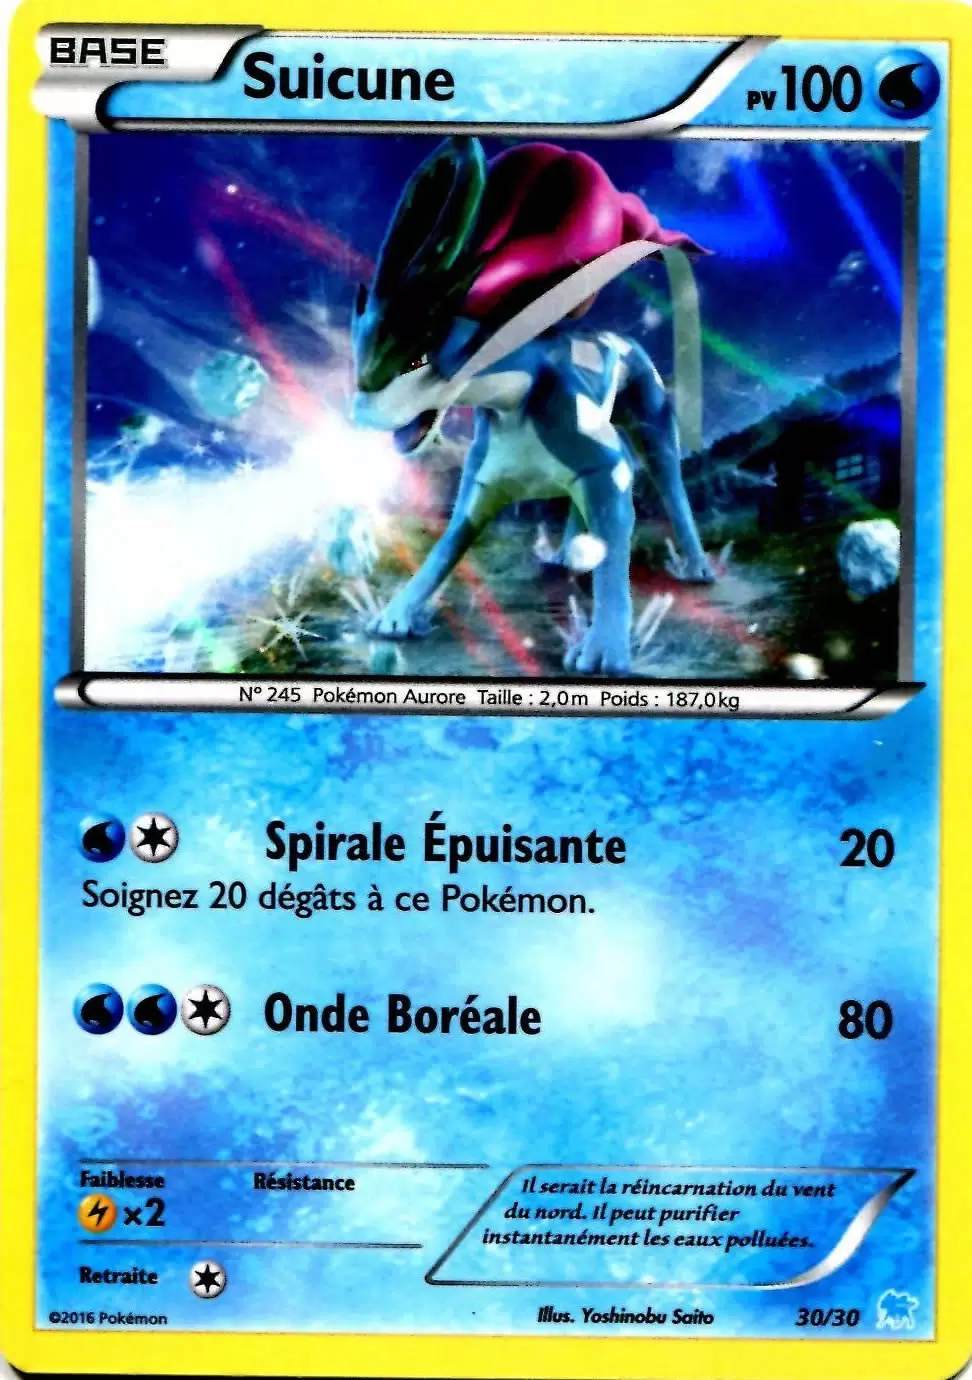 XY Trainer Kit (Suicune) - Suicune